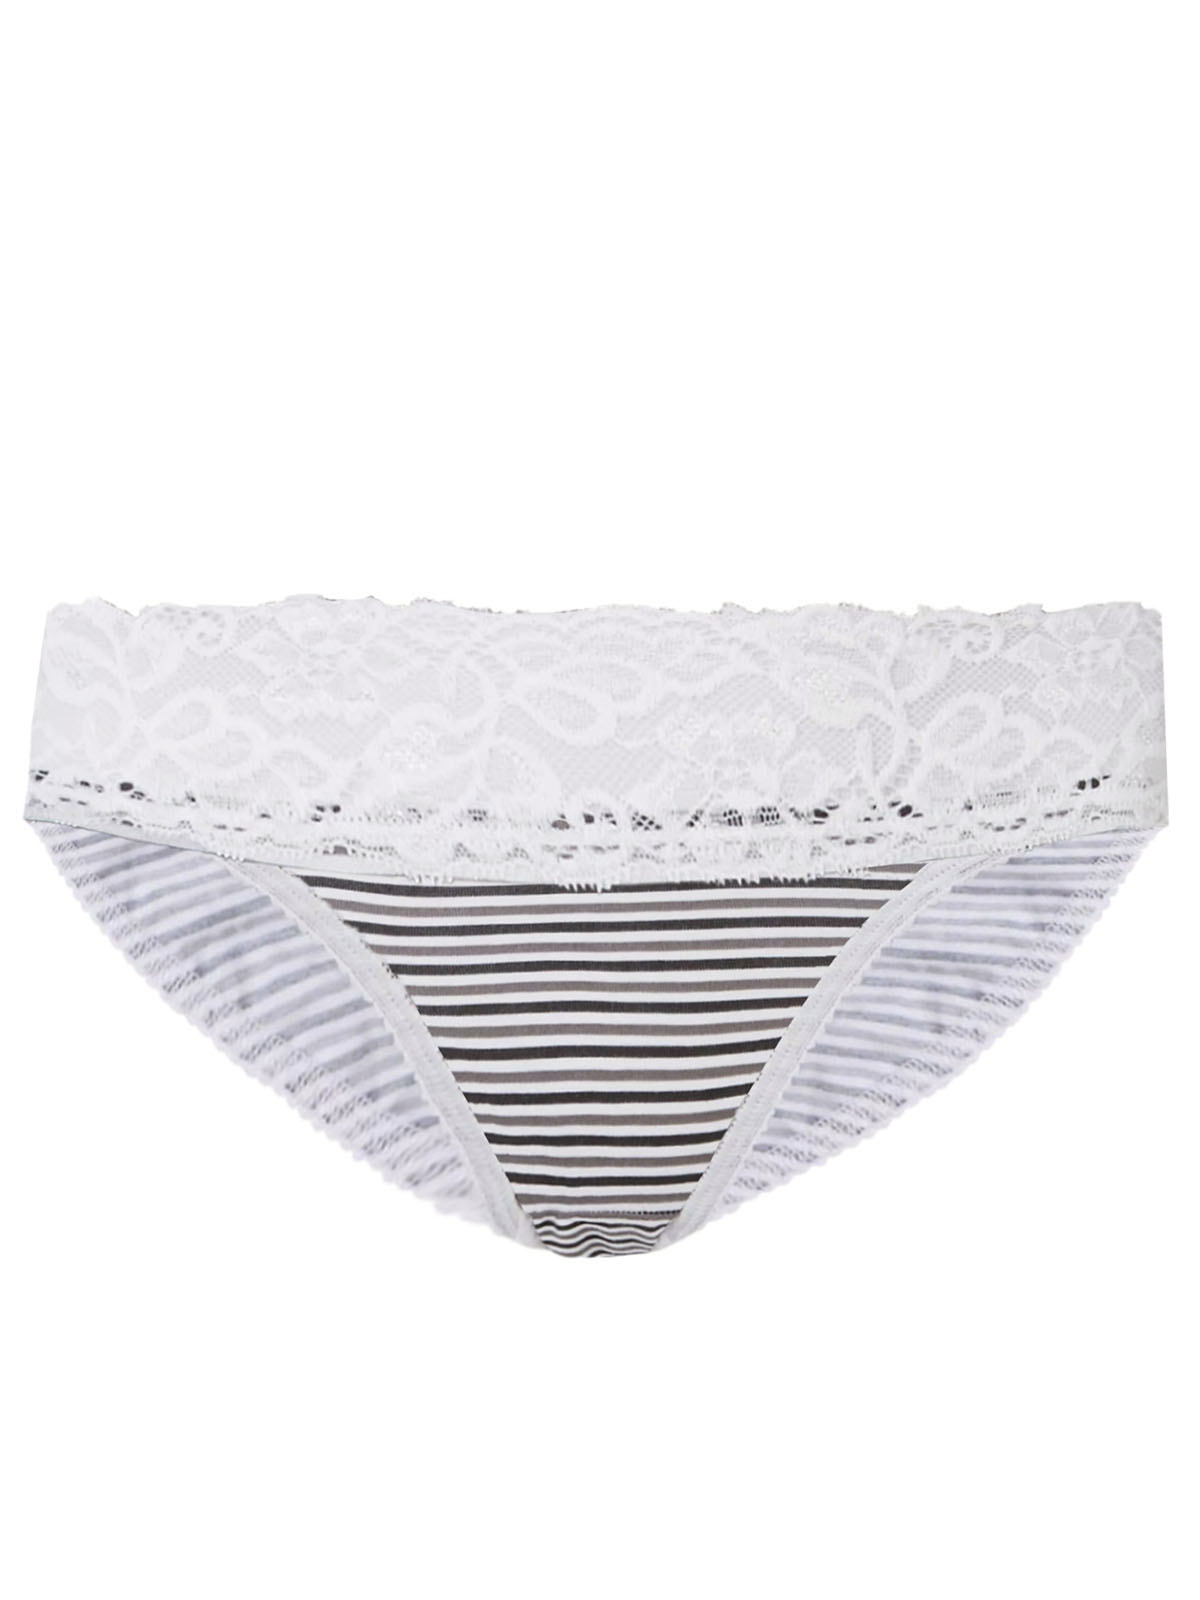 M&S shoppers are obsessed with these £8 high-rise knickers - and